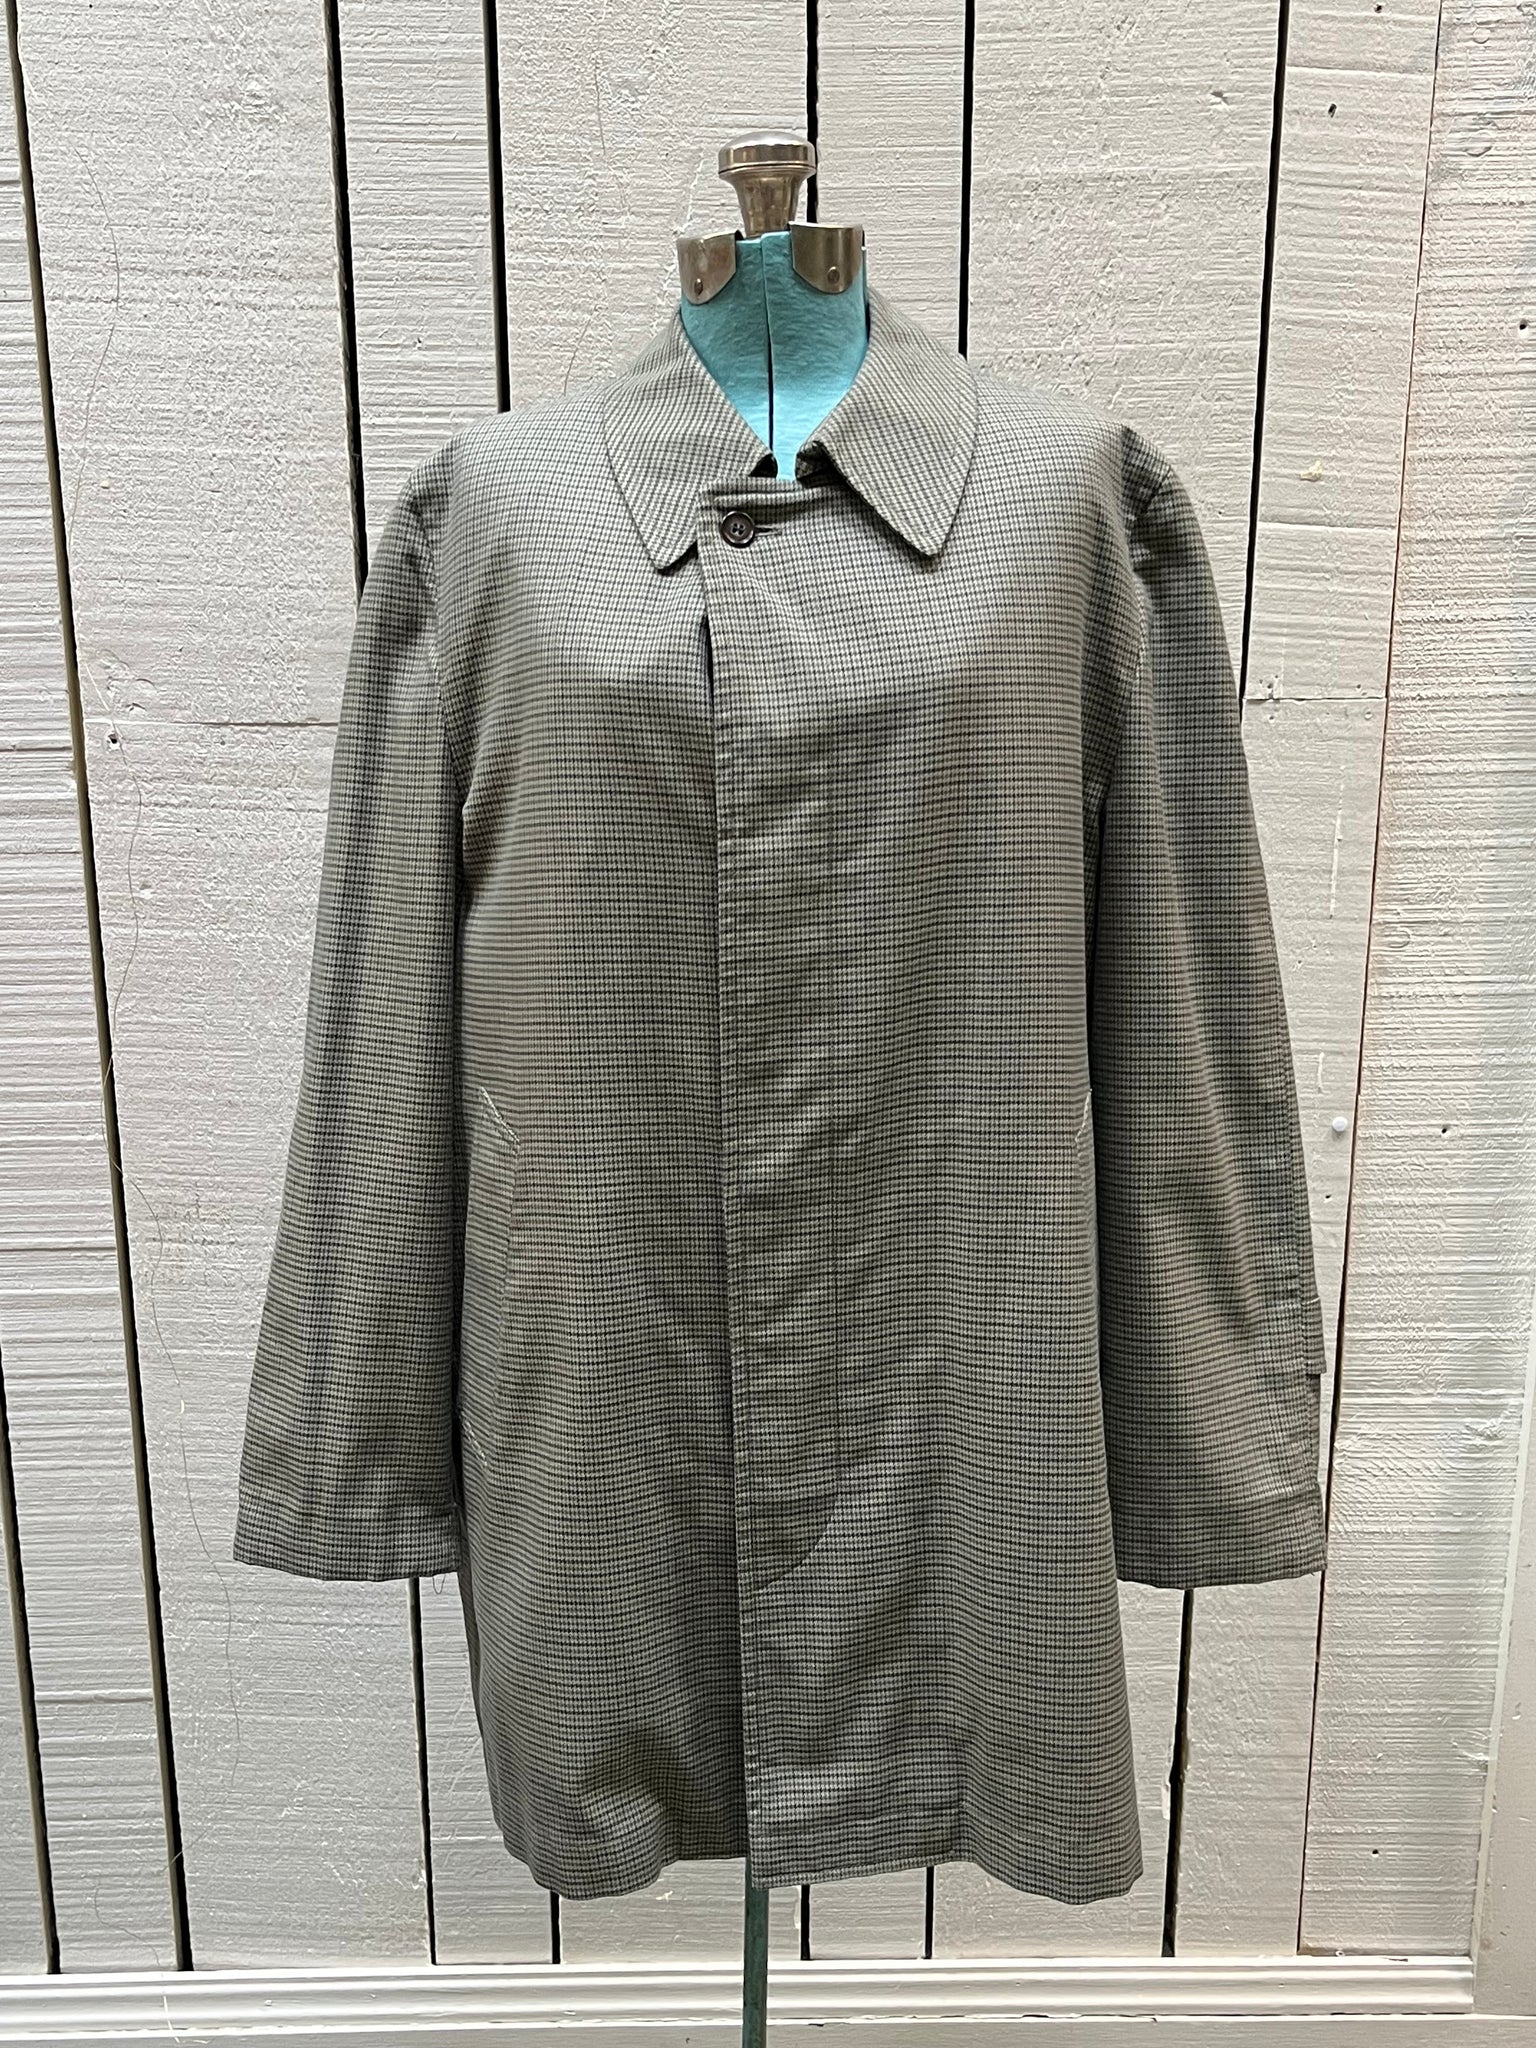 Vintage London Fog Grey Houndstooth Maincoat with Removable Lining